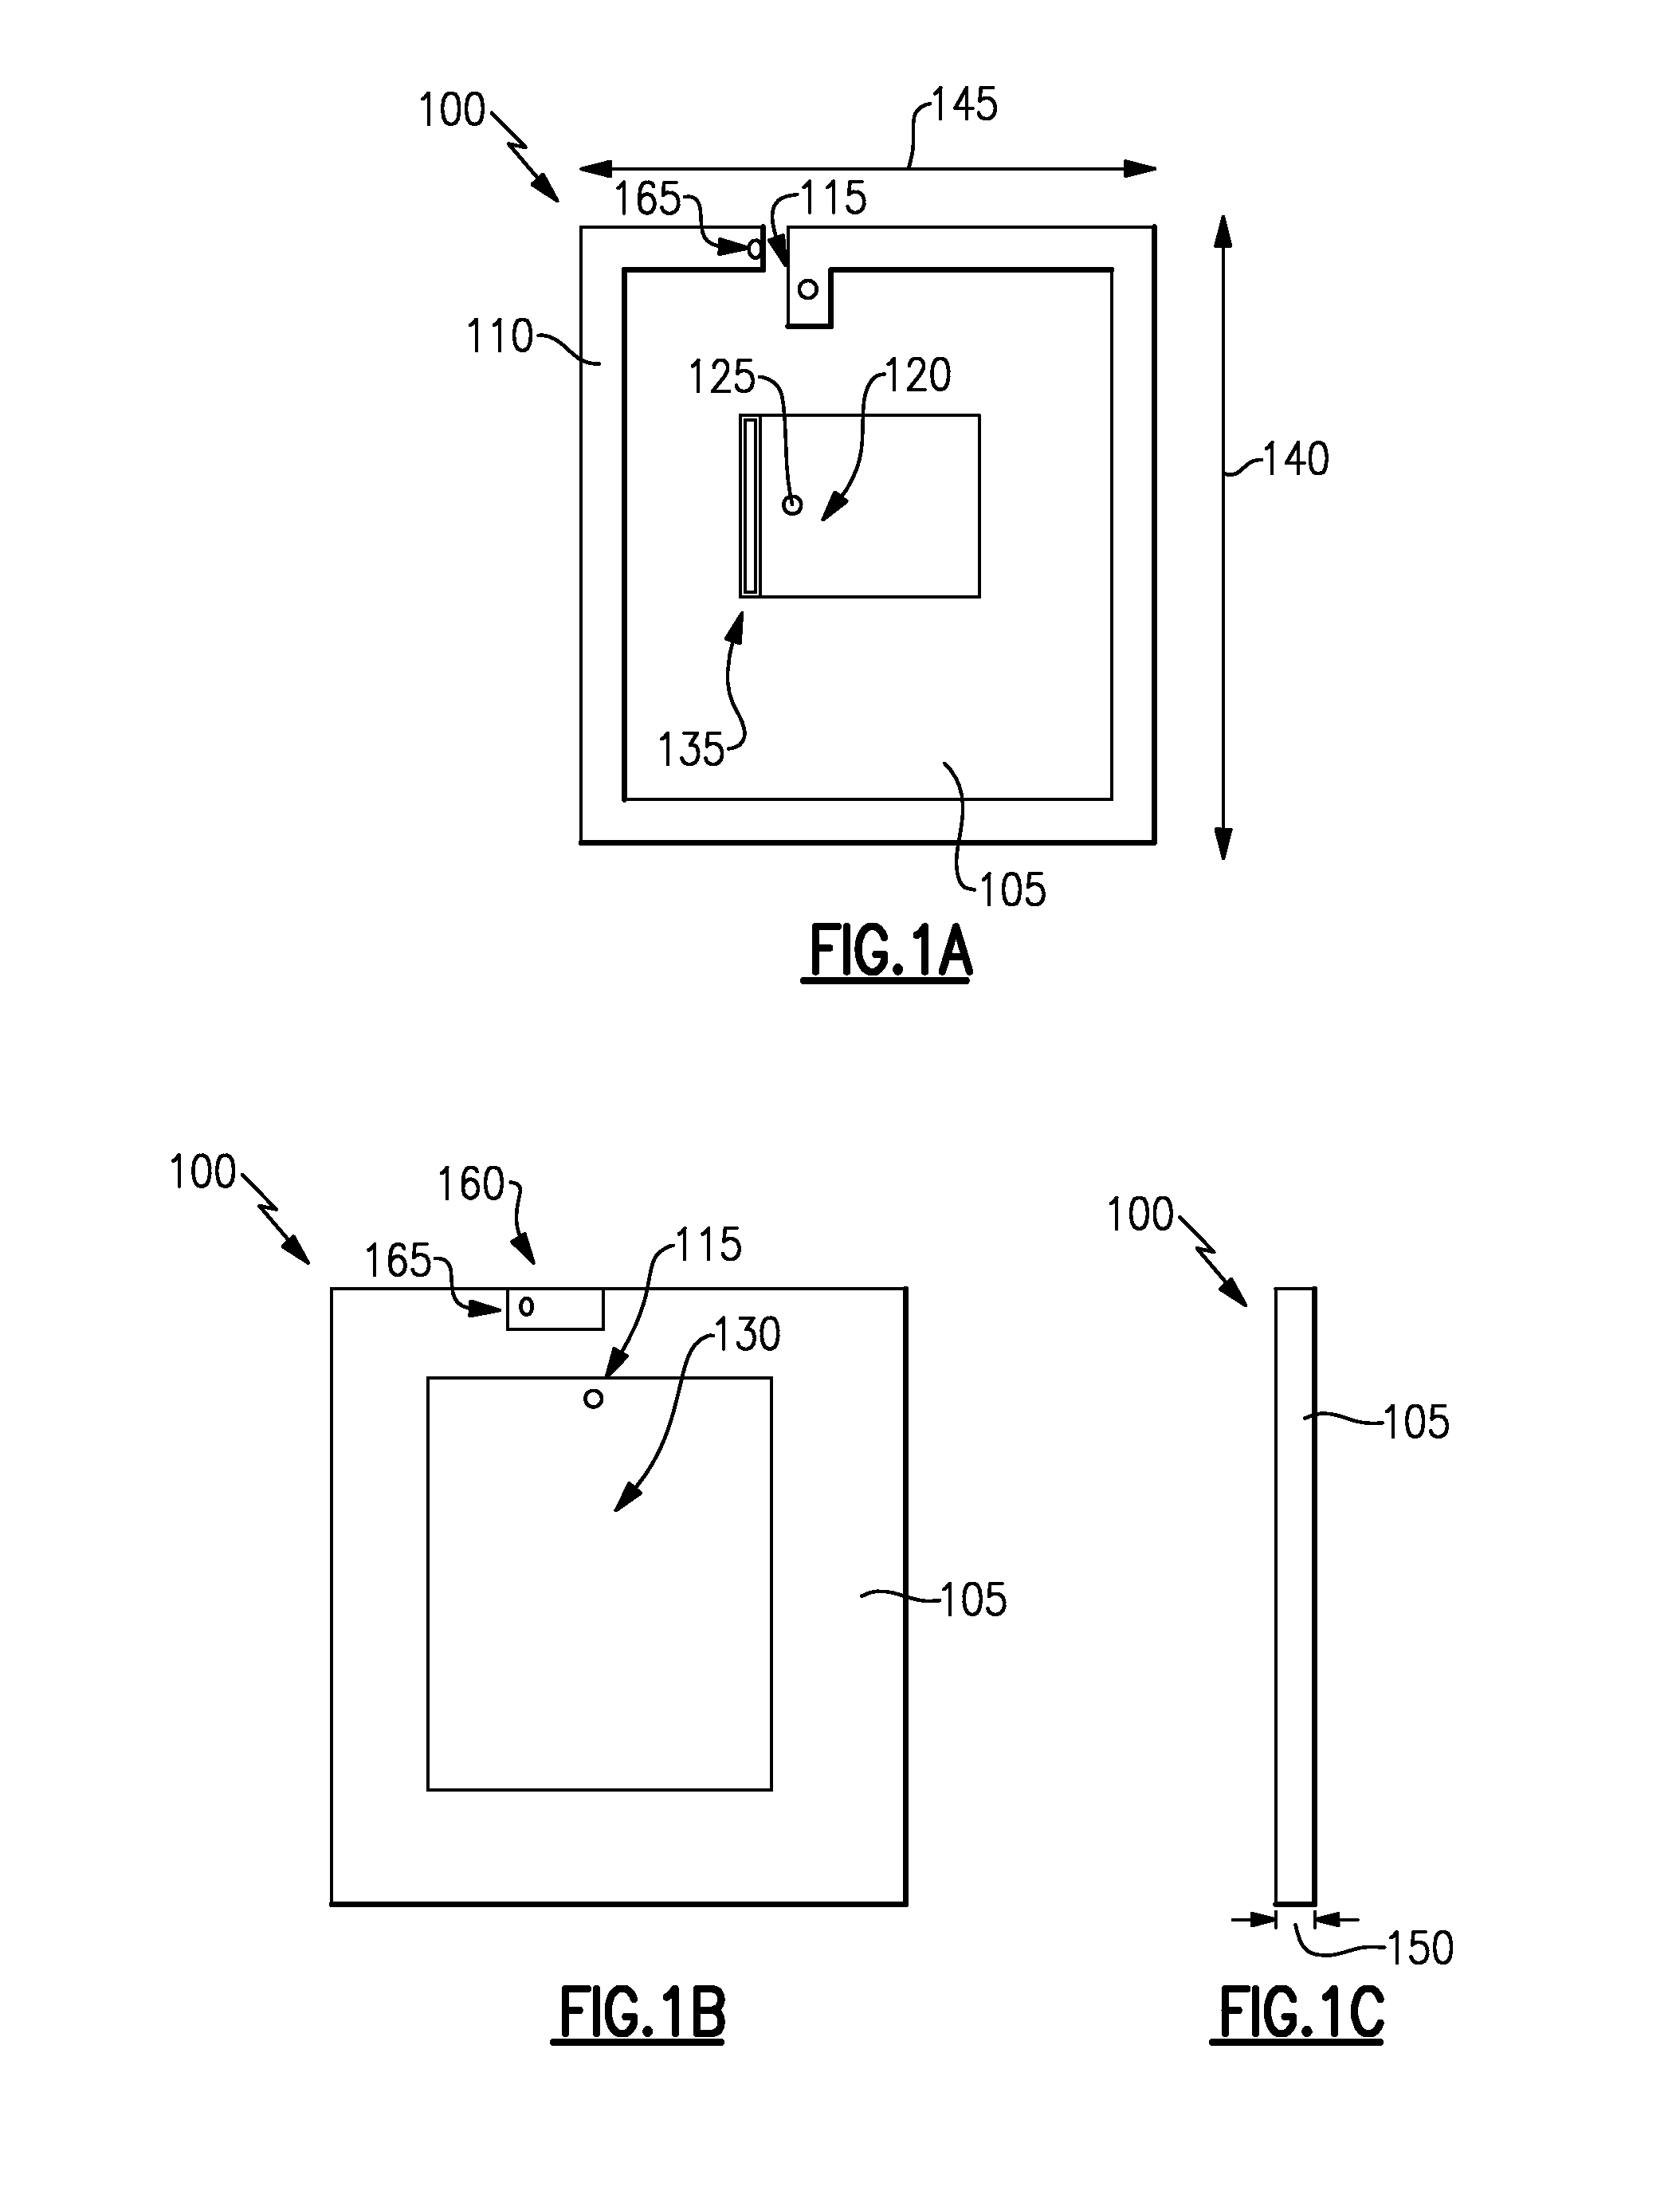 Dual band electrically small tunable antenna